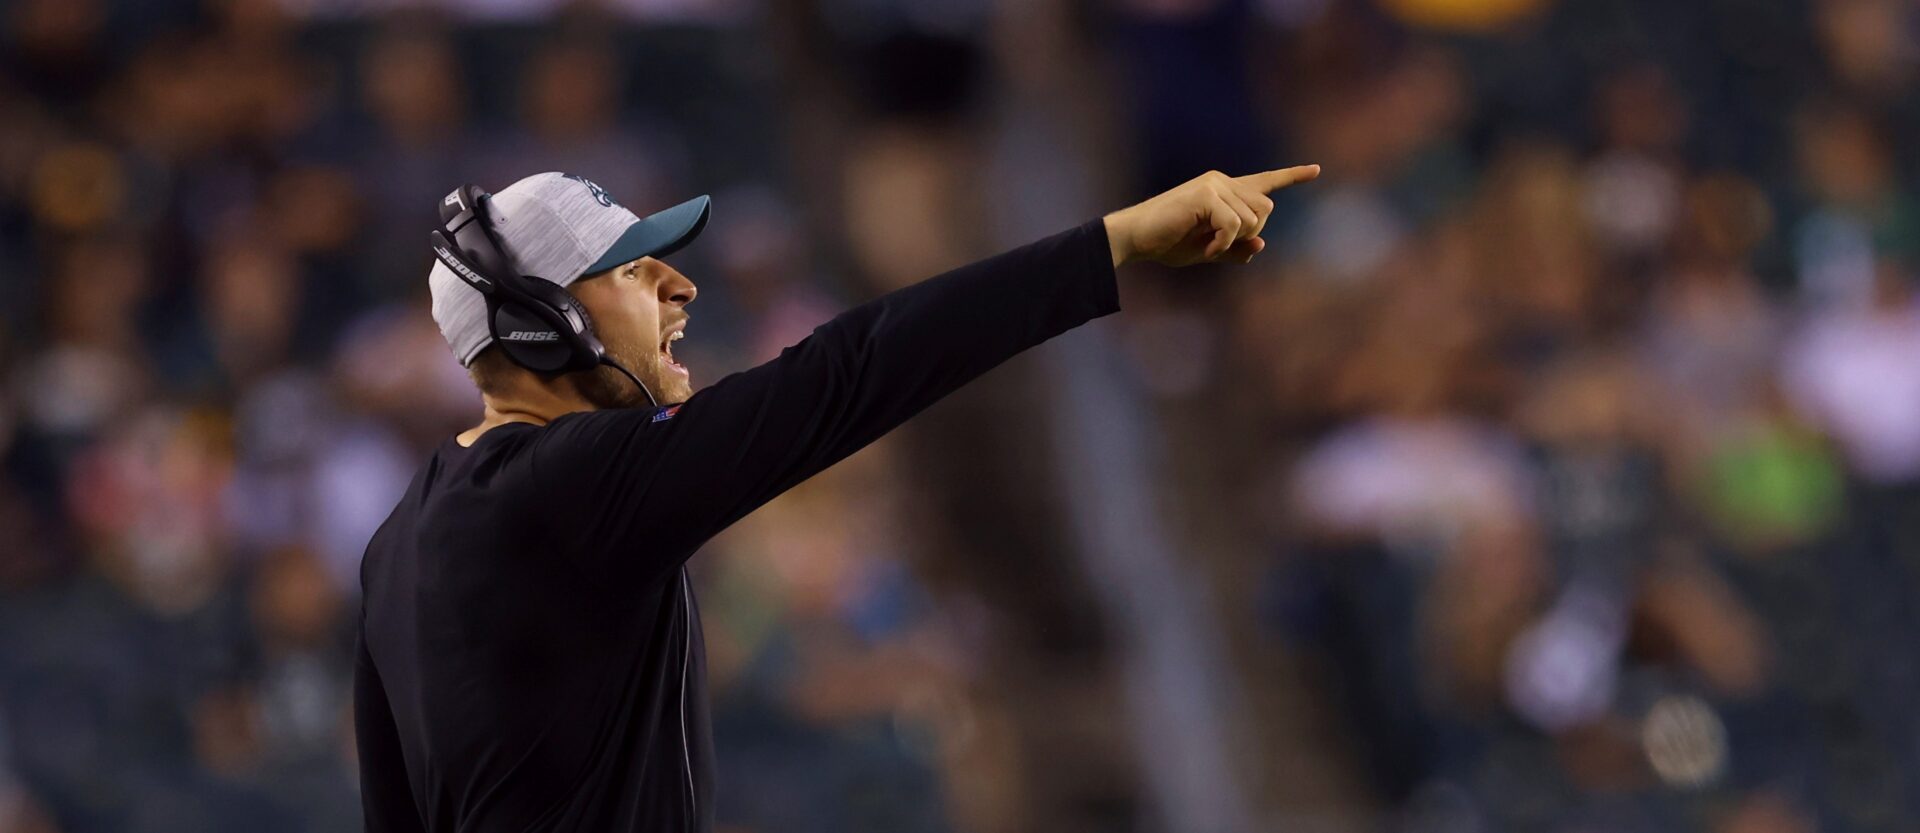 FILE - Philadelphia Eagles linebackers coach Nick Rallis gestures during a preseason NFL football game against the Pittsburgh Steelers, Thursday, Aug. 12, 2021, in Philadelphia. It's a big weekend for Nick Rallis and big brother Mike. Mike Rallis, better known as WWE star Madcap Moss, is in the mix for Saturday's Royal Rumble. (AP Photo/Rich Schultz, File)